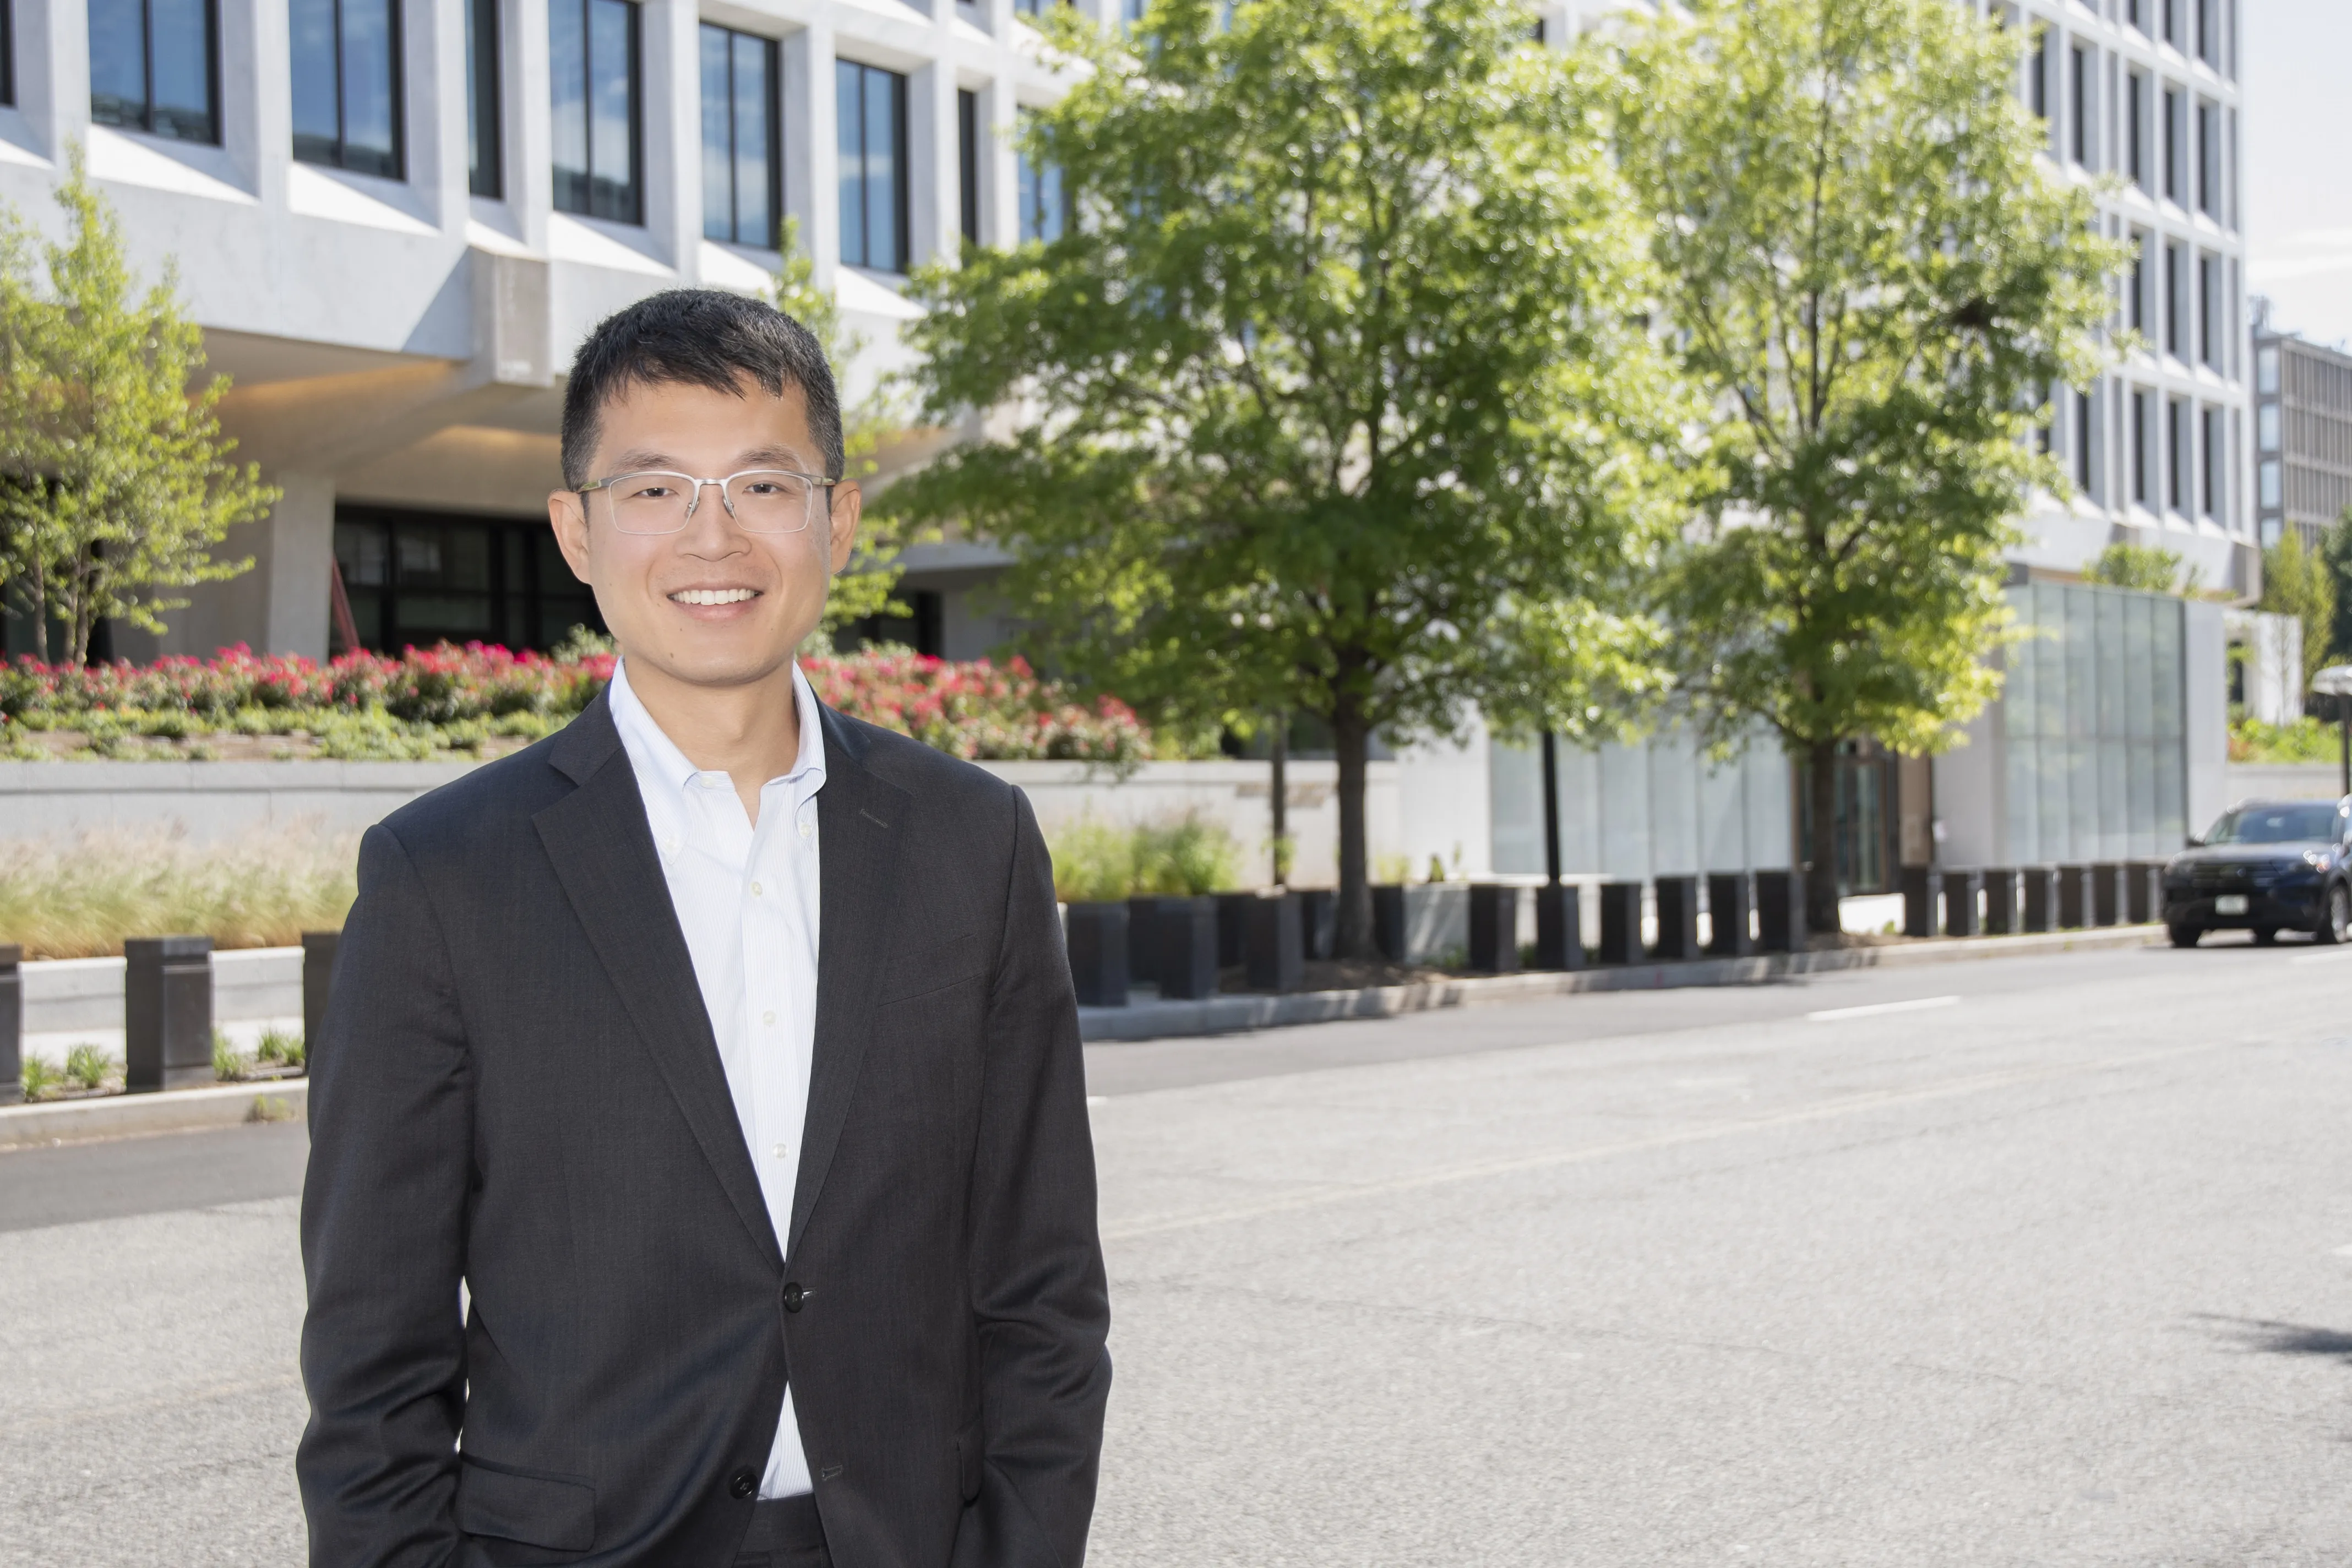 Professor Jeffery Zhang standing in front of the Federal Reserve building